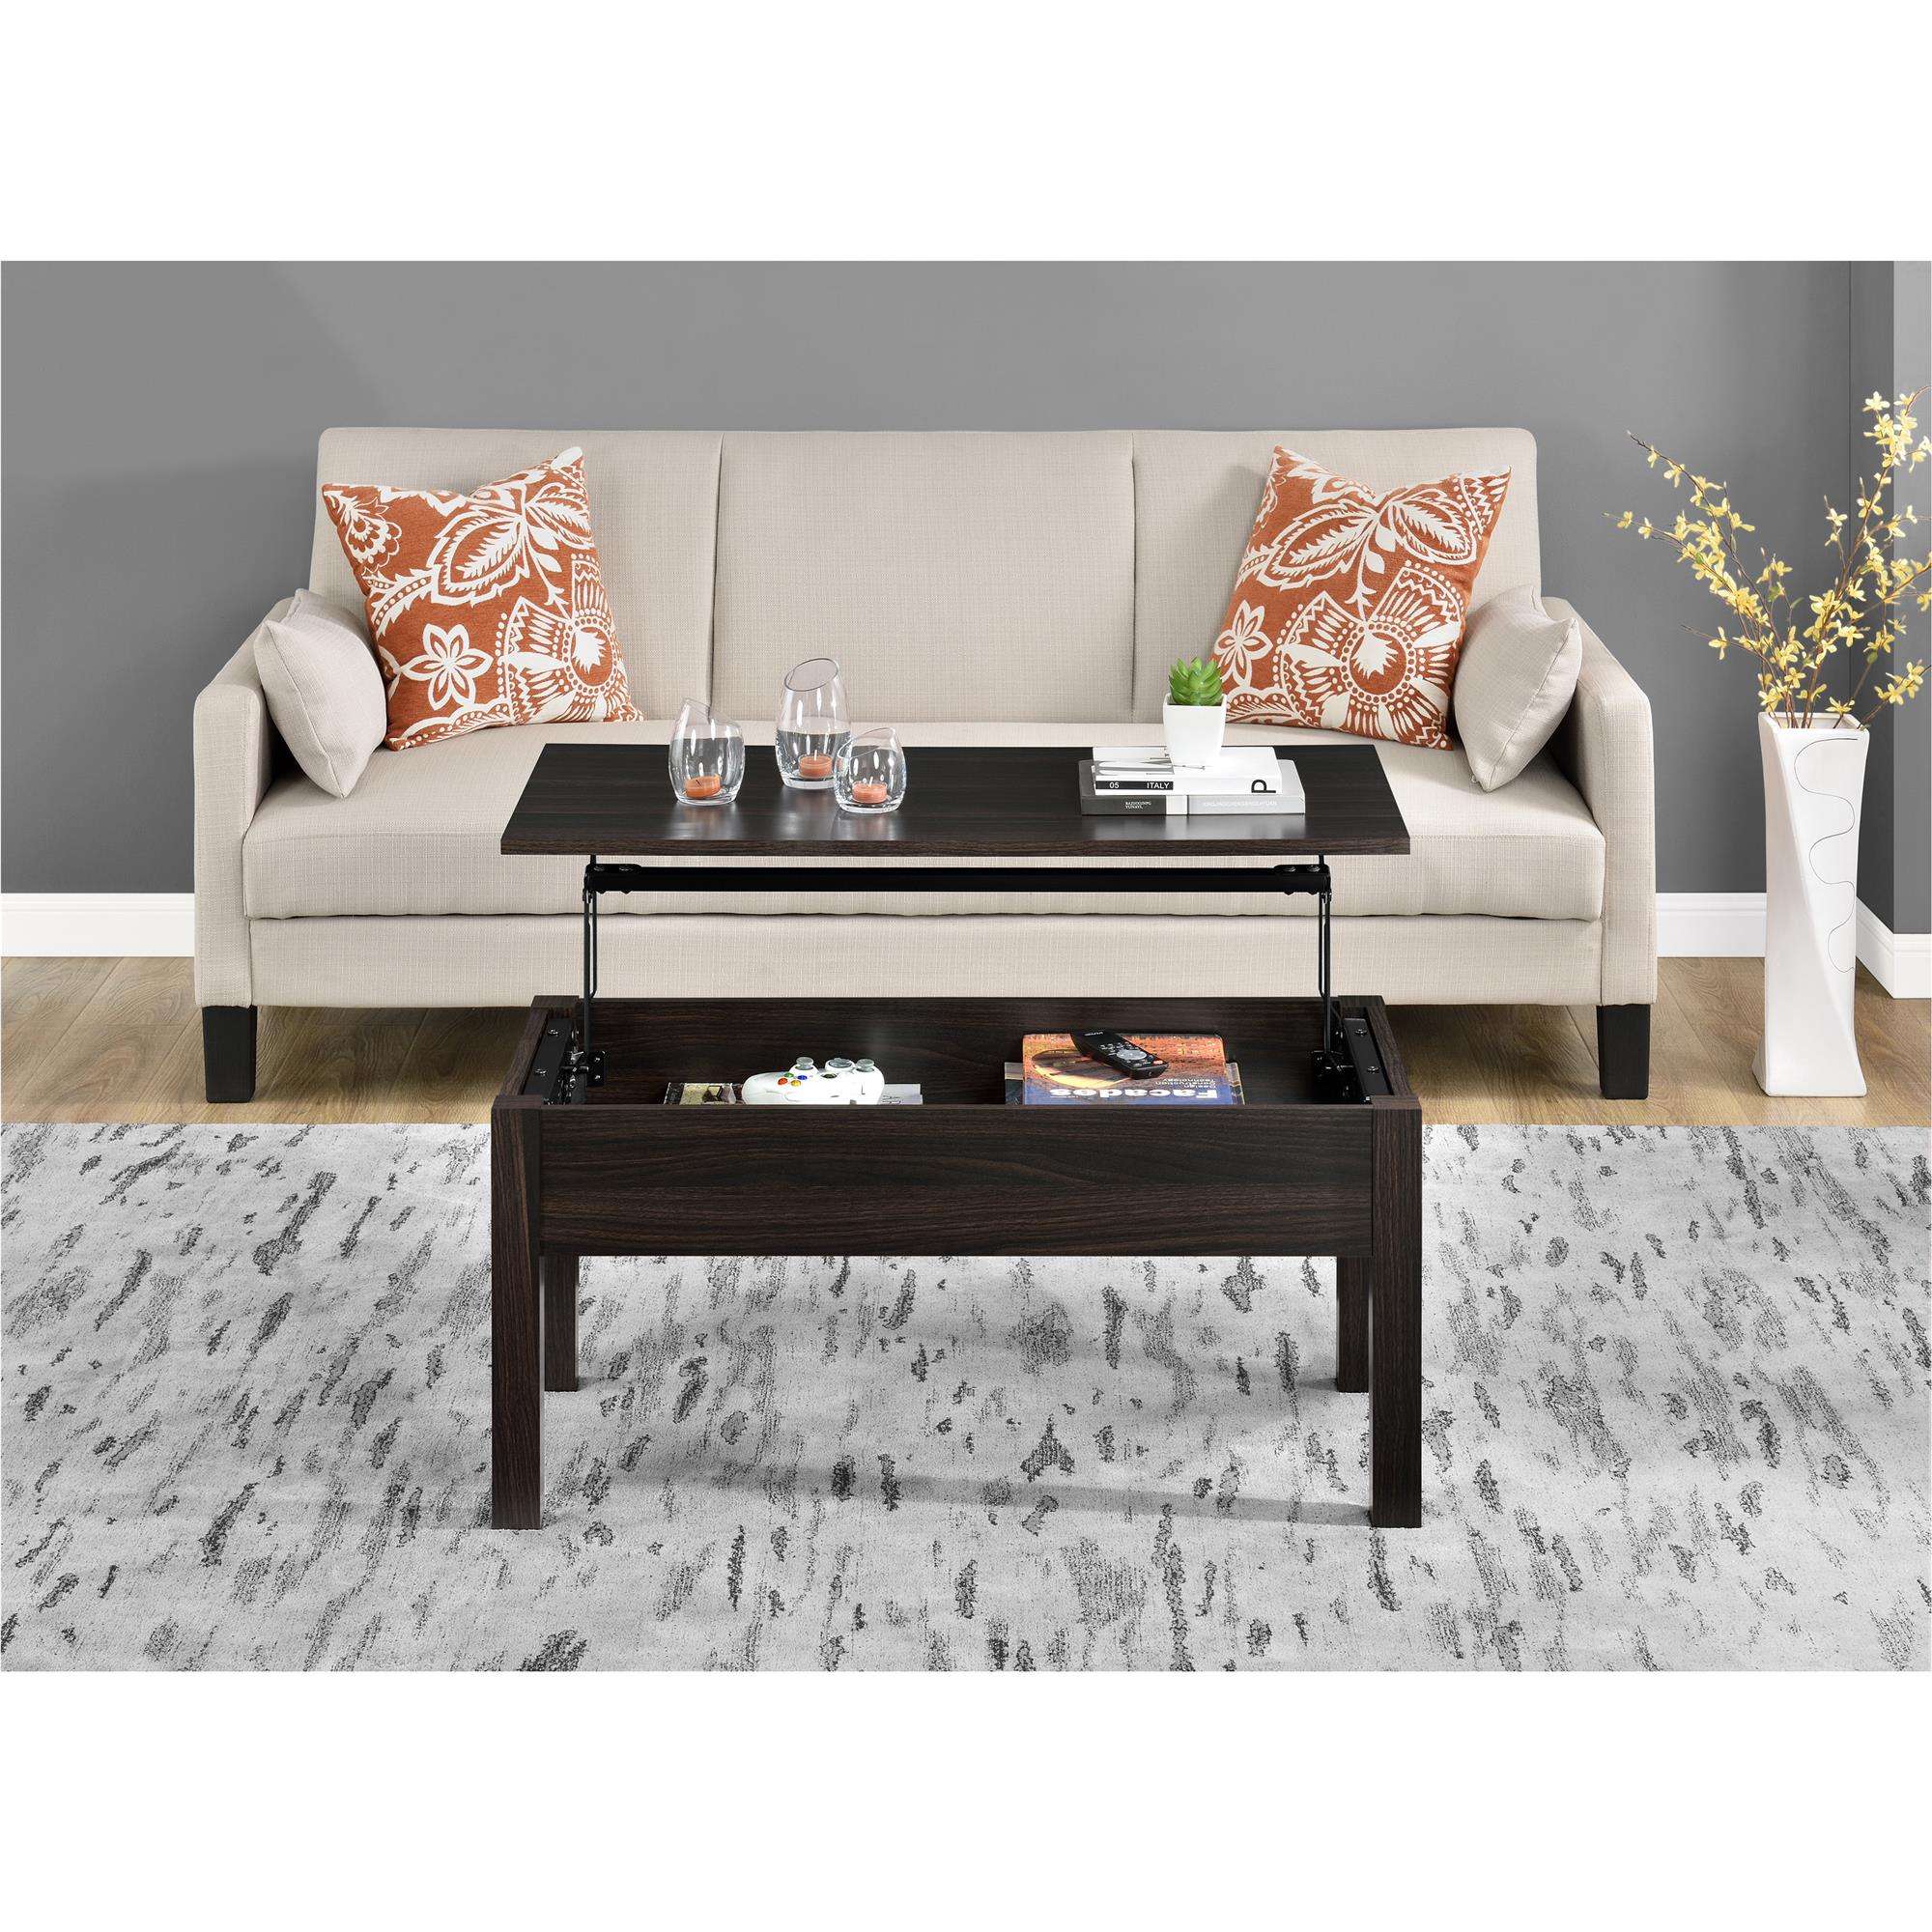 Mainstays Lift Top Coffee Table, Espresso - image 1 of 14